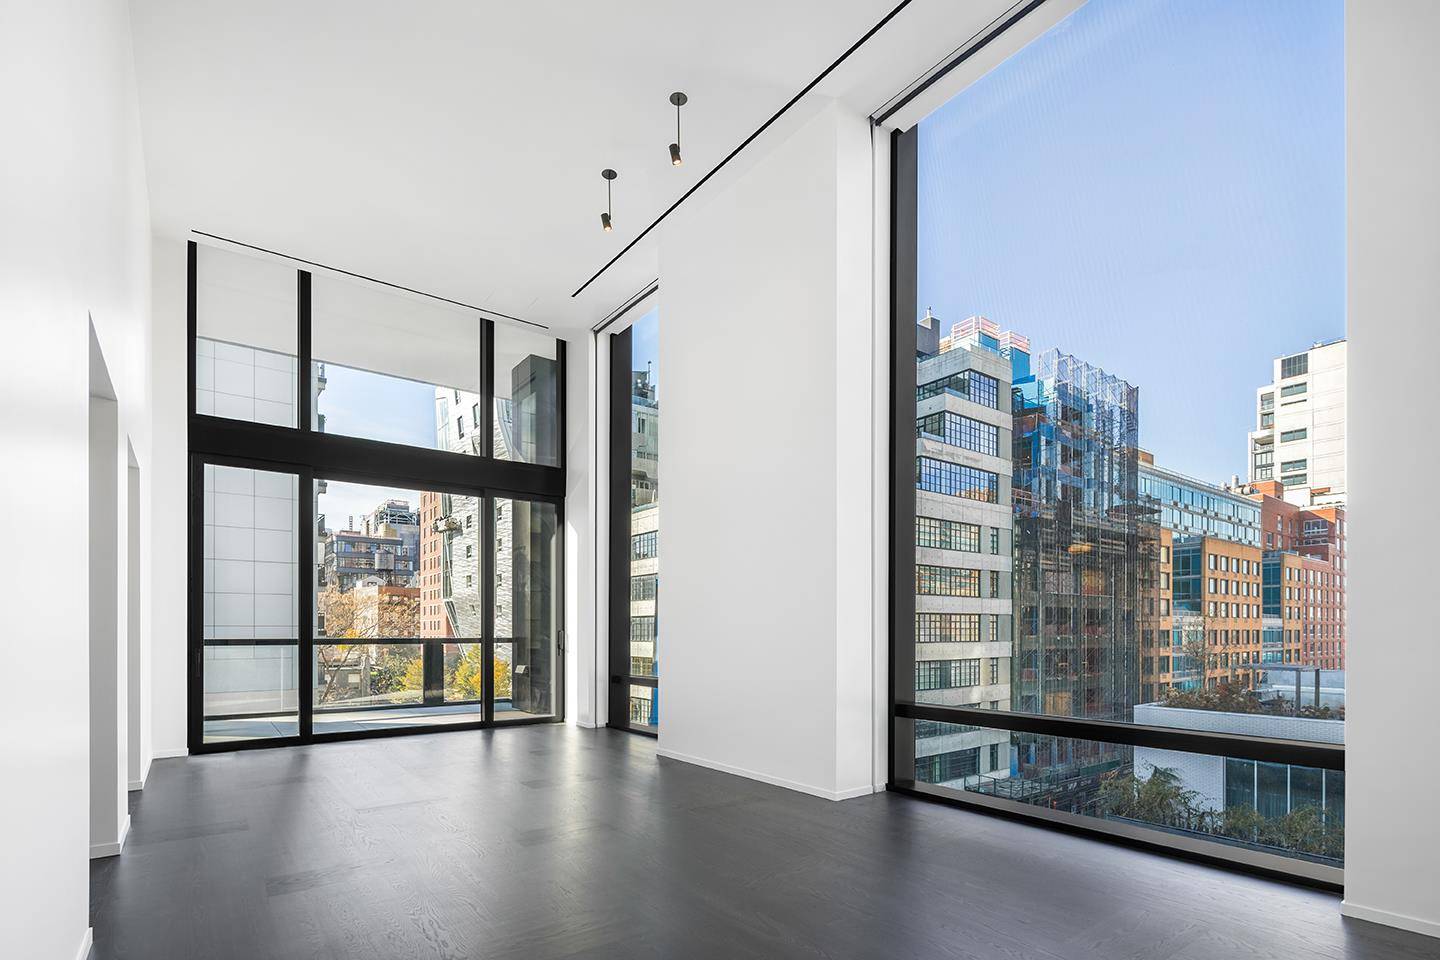 Residence 5 at 503W24th St is a full floor 3, 857 square foot, 4 bedroom, 4.